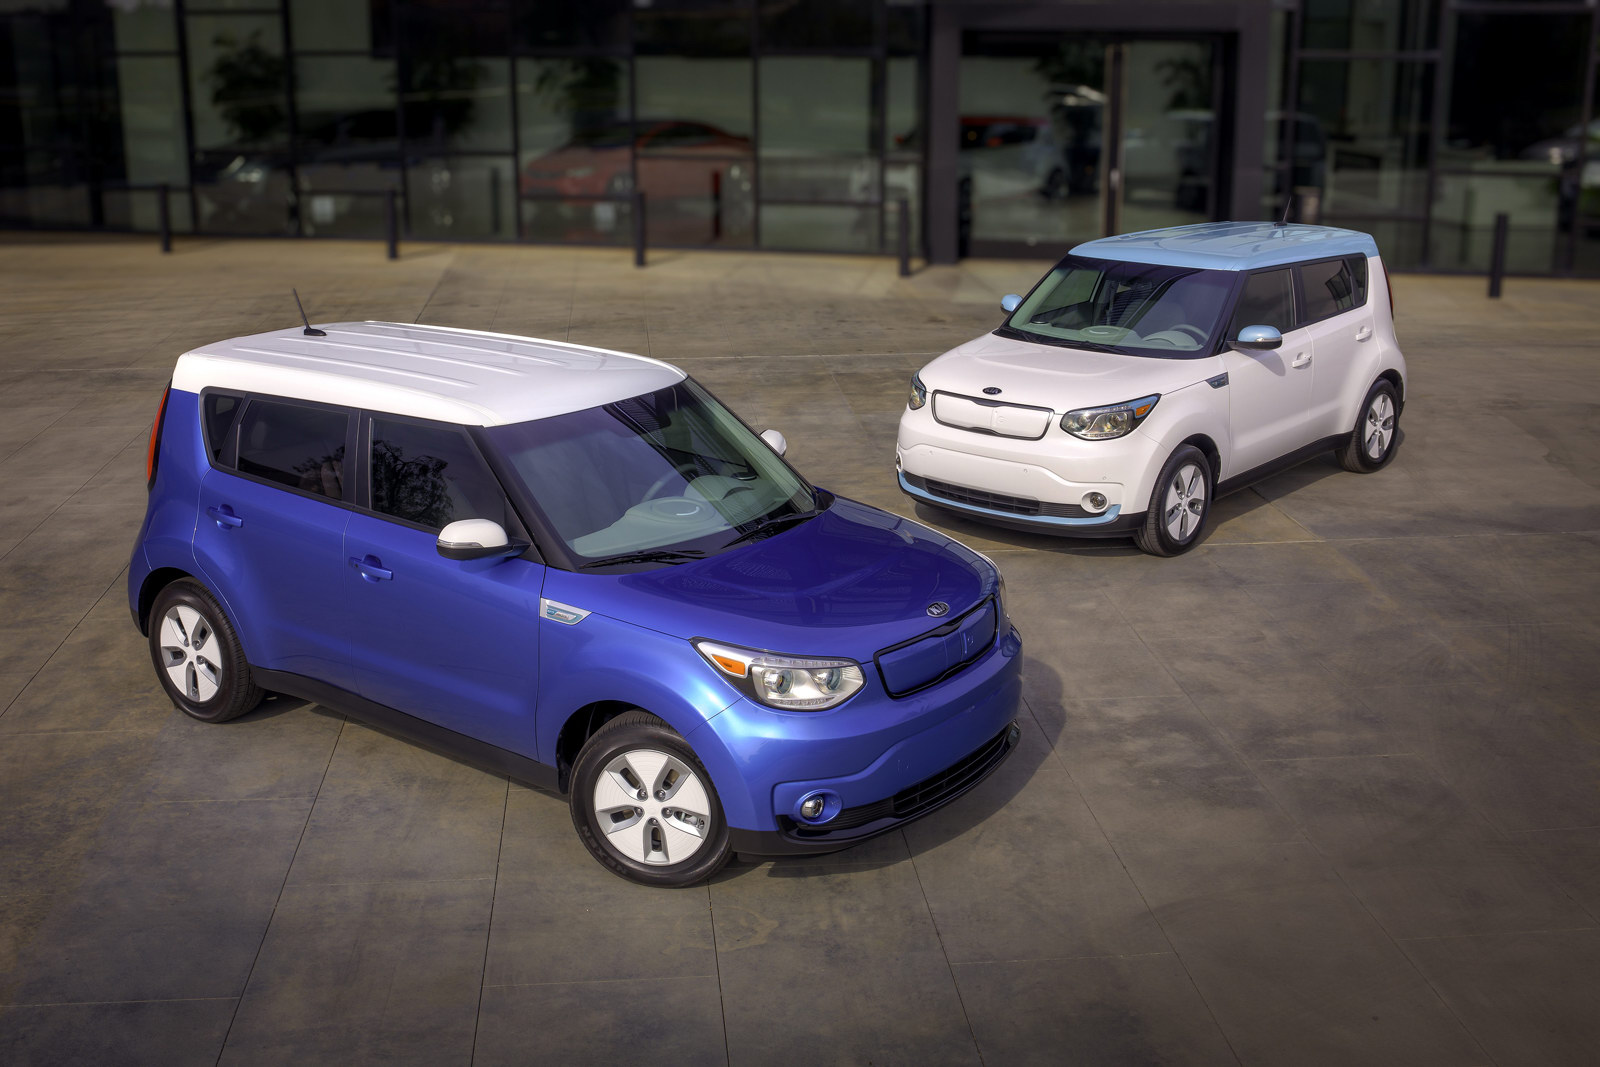 new-electric-2015-kia-soul-from-33-700-sans-7-500-tax-rebate-carscoops